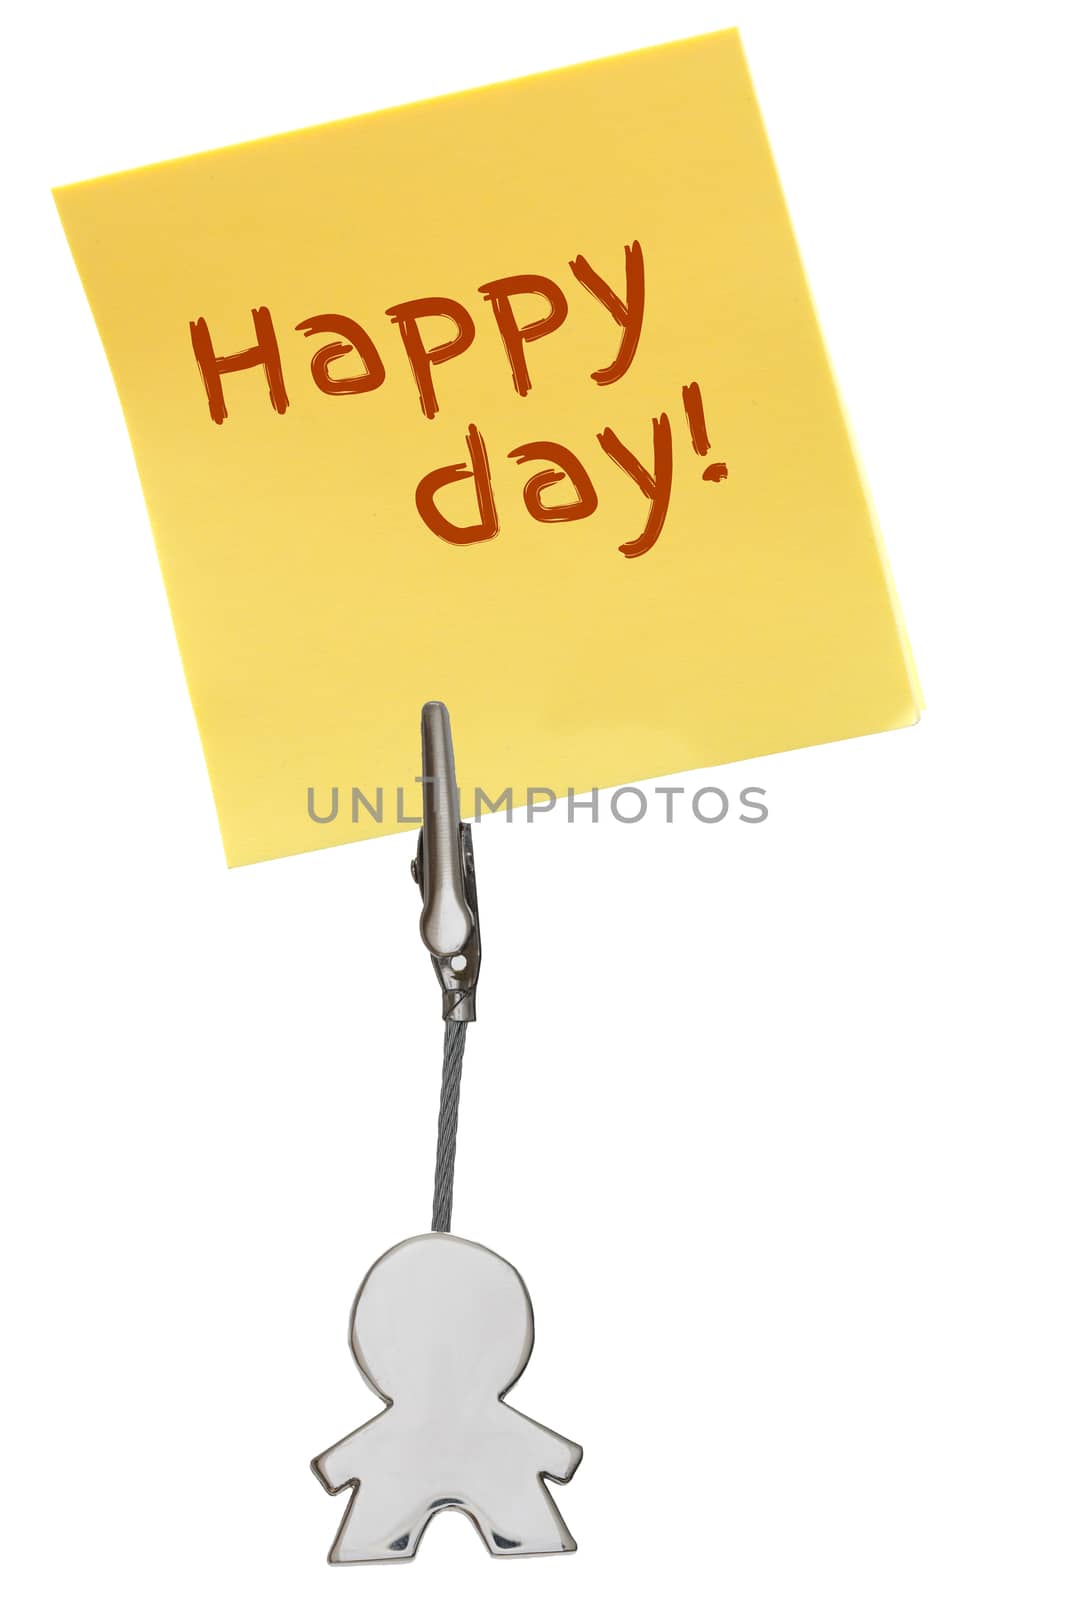 Man Figure Business Card Holder with clip holding a yellow paper note HAPPY DAY; isolated on white background, customizable